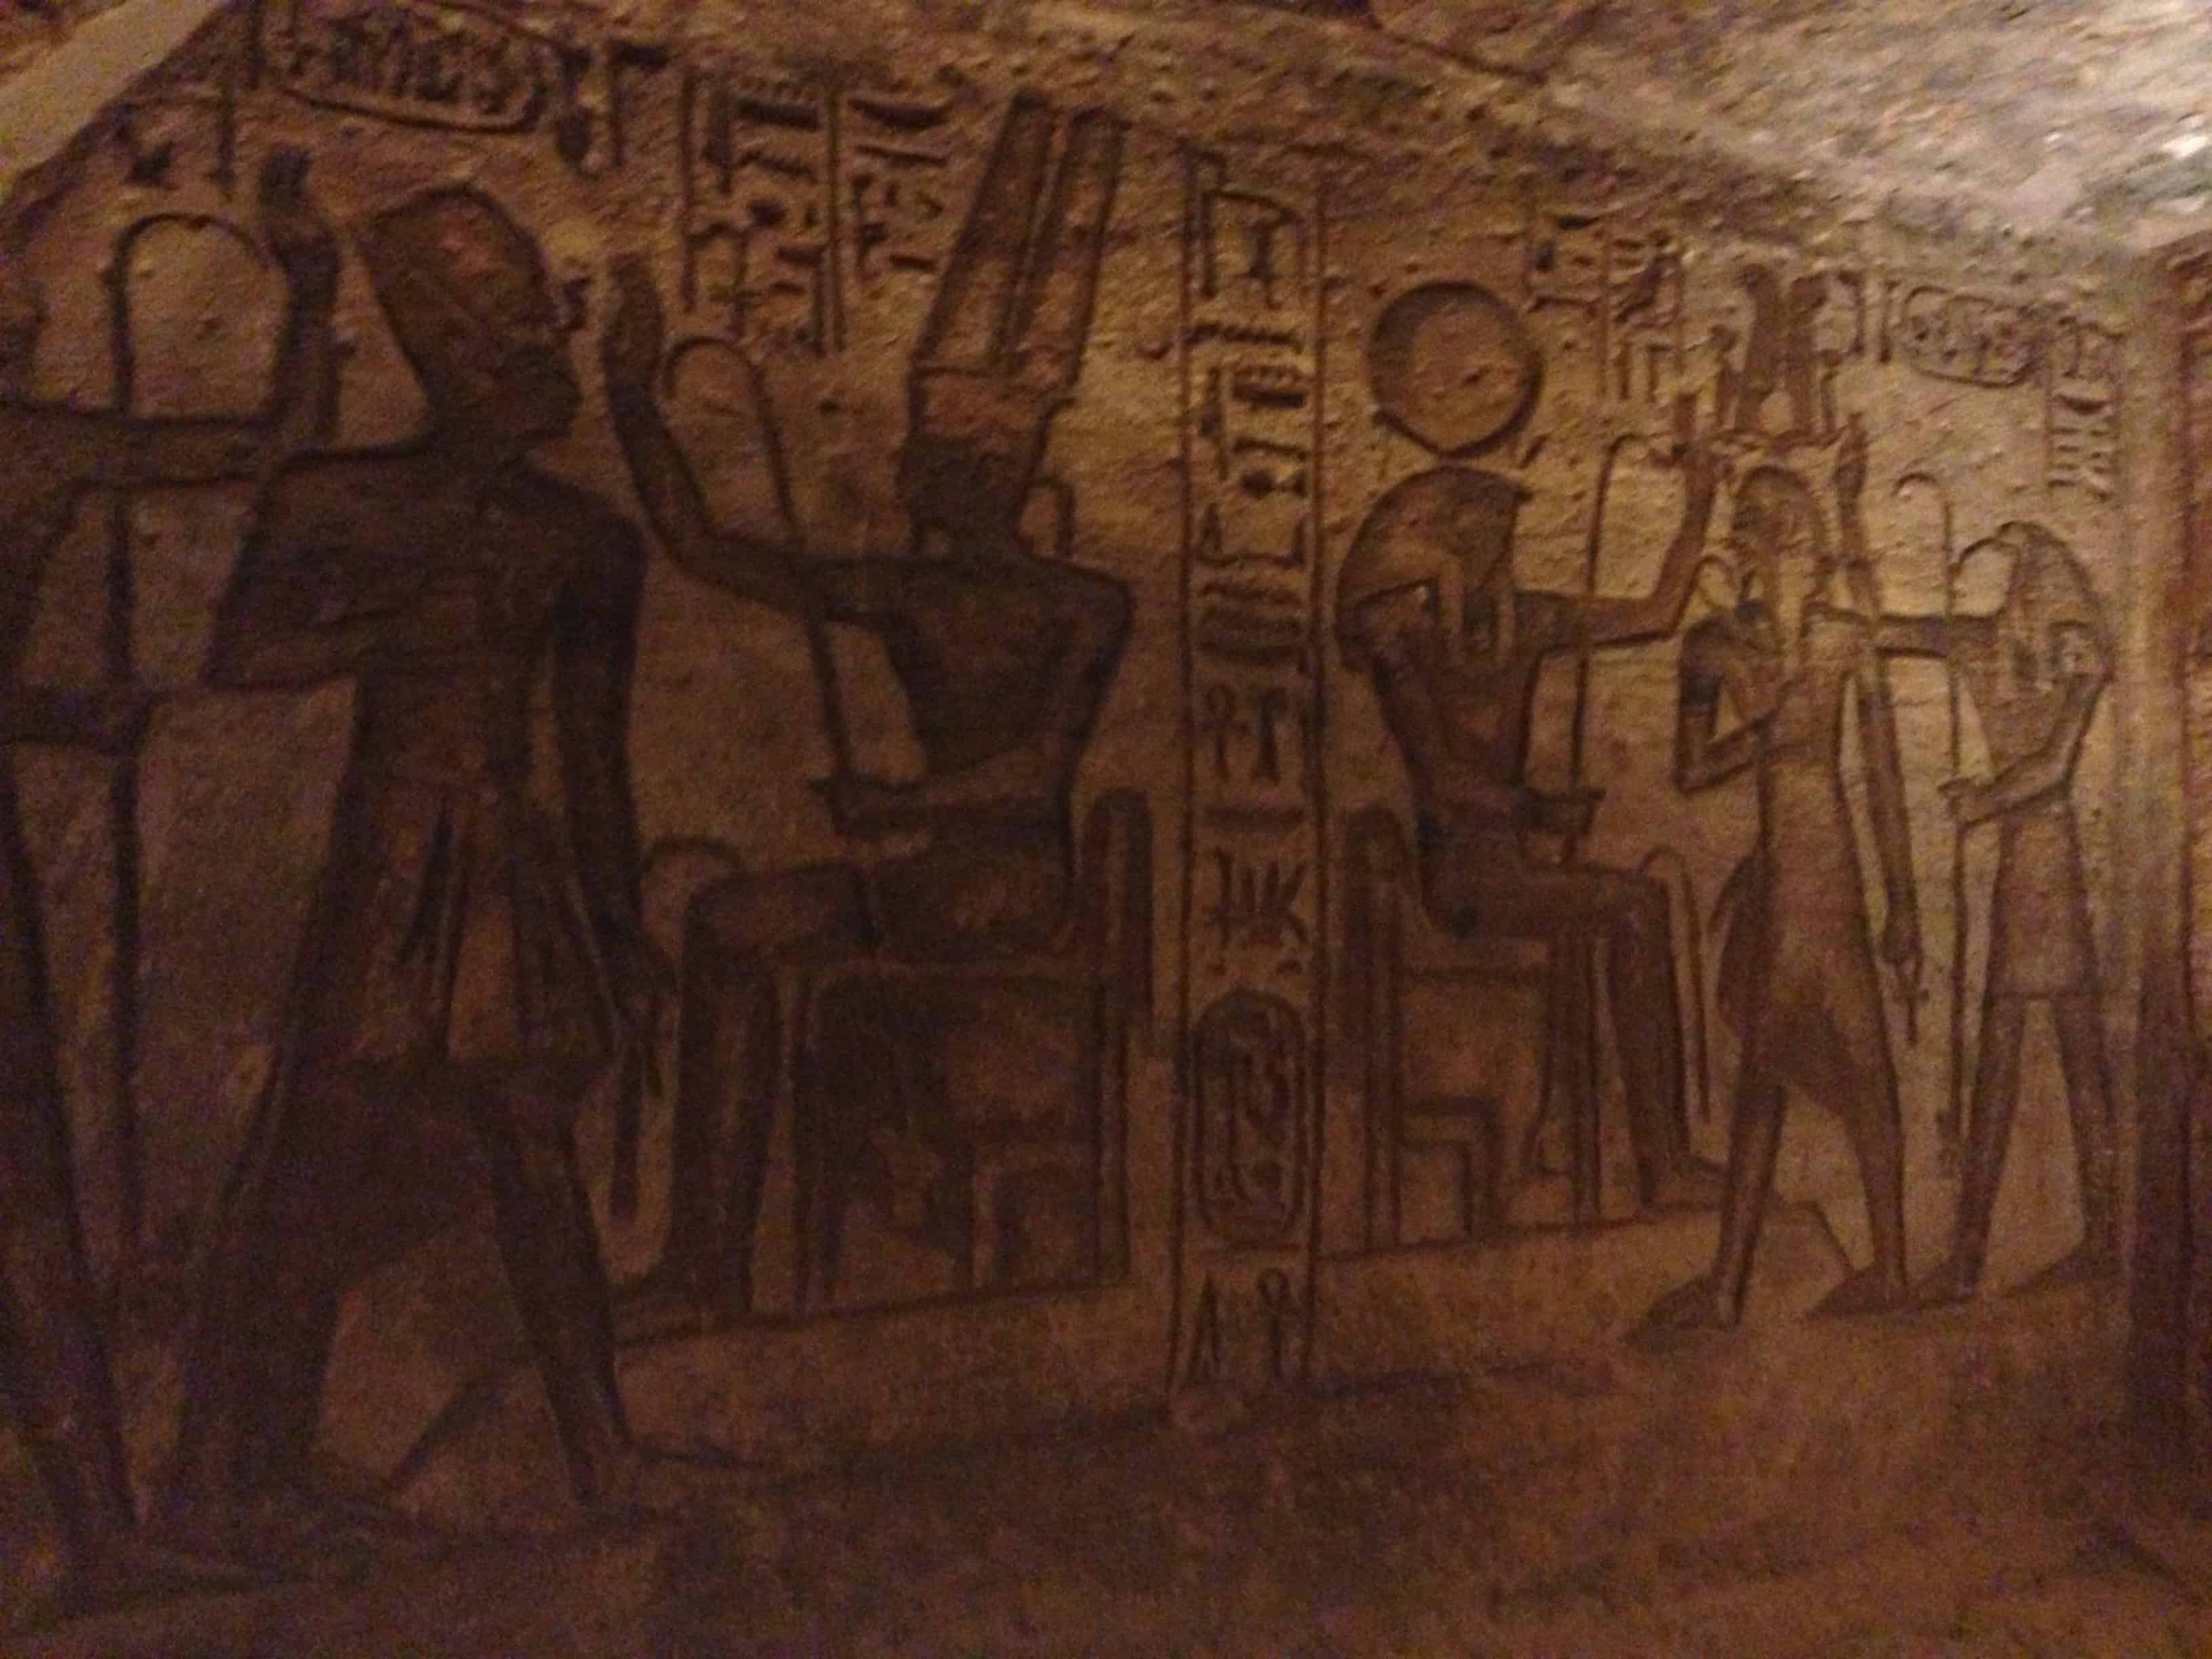 Relief inside the temple at the Temple of Ramses II at Abu Simbel, Egypt